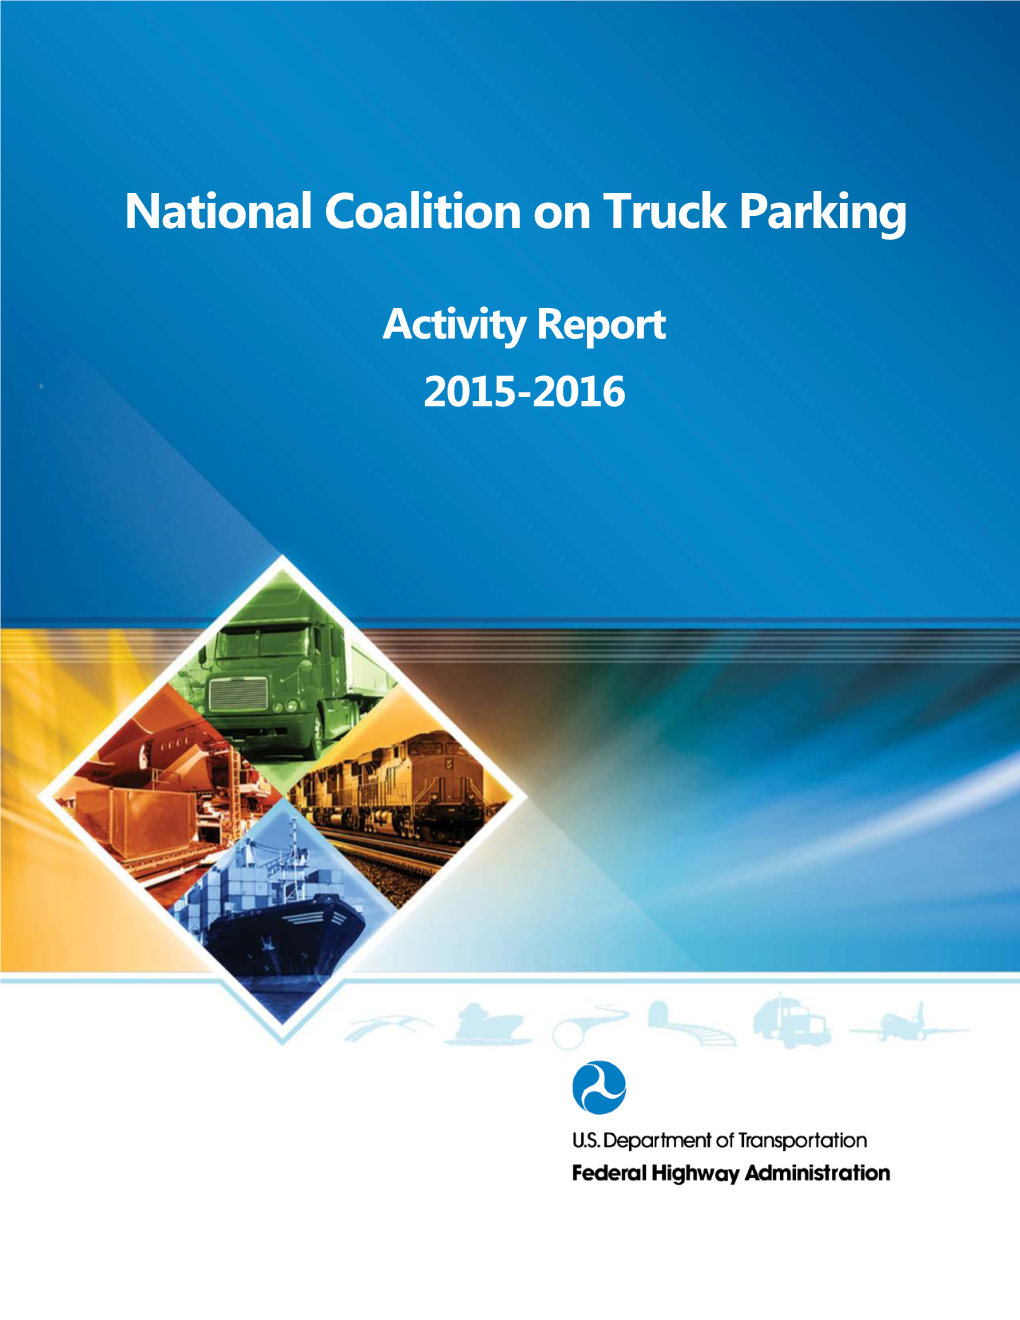 National Coalition on Truck Parking Activity Report